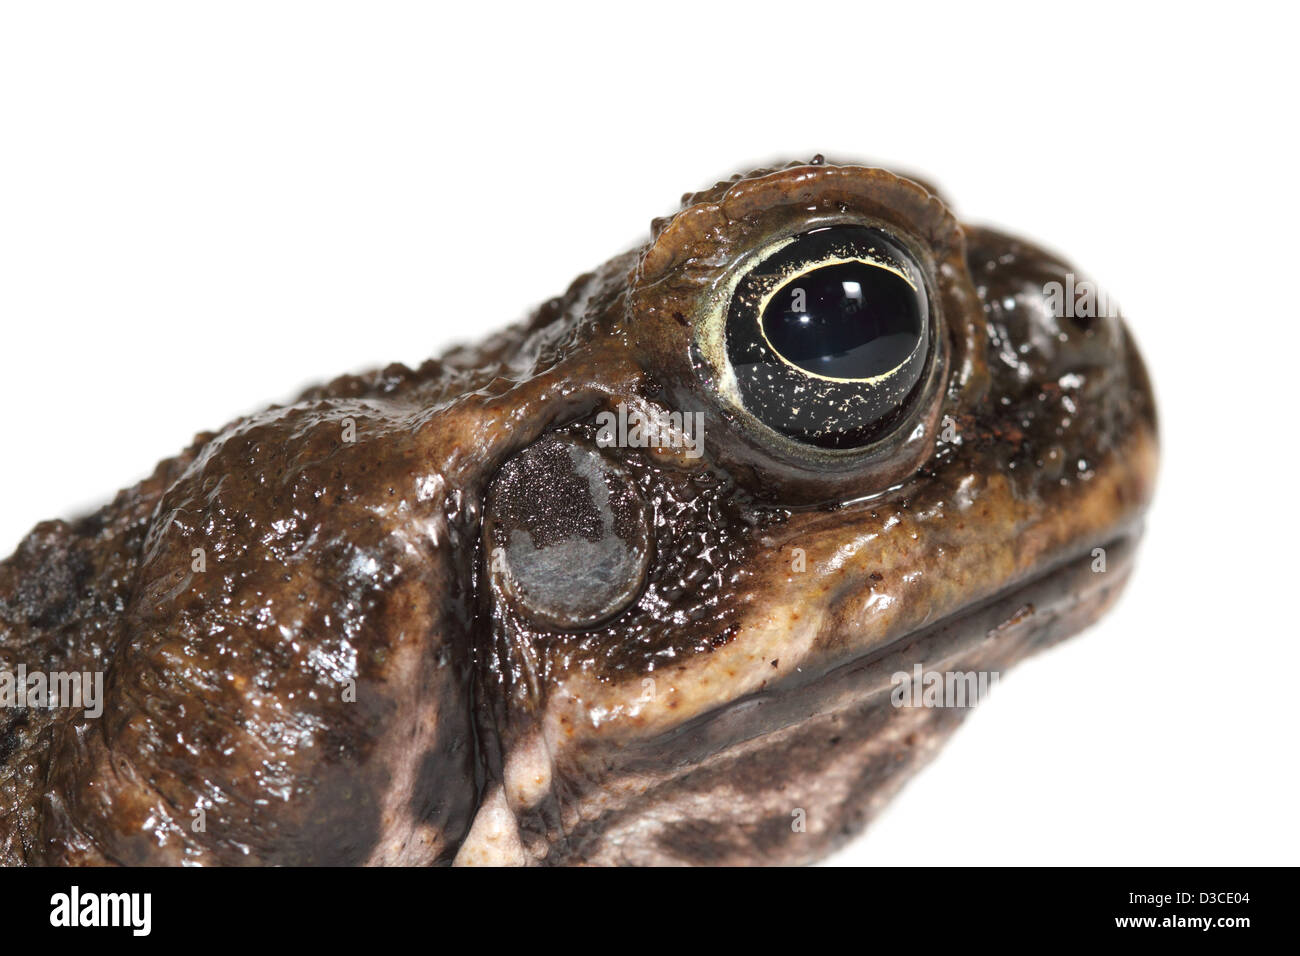 cane toad photographed in a studio suitable for cut-out Stock Photo